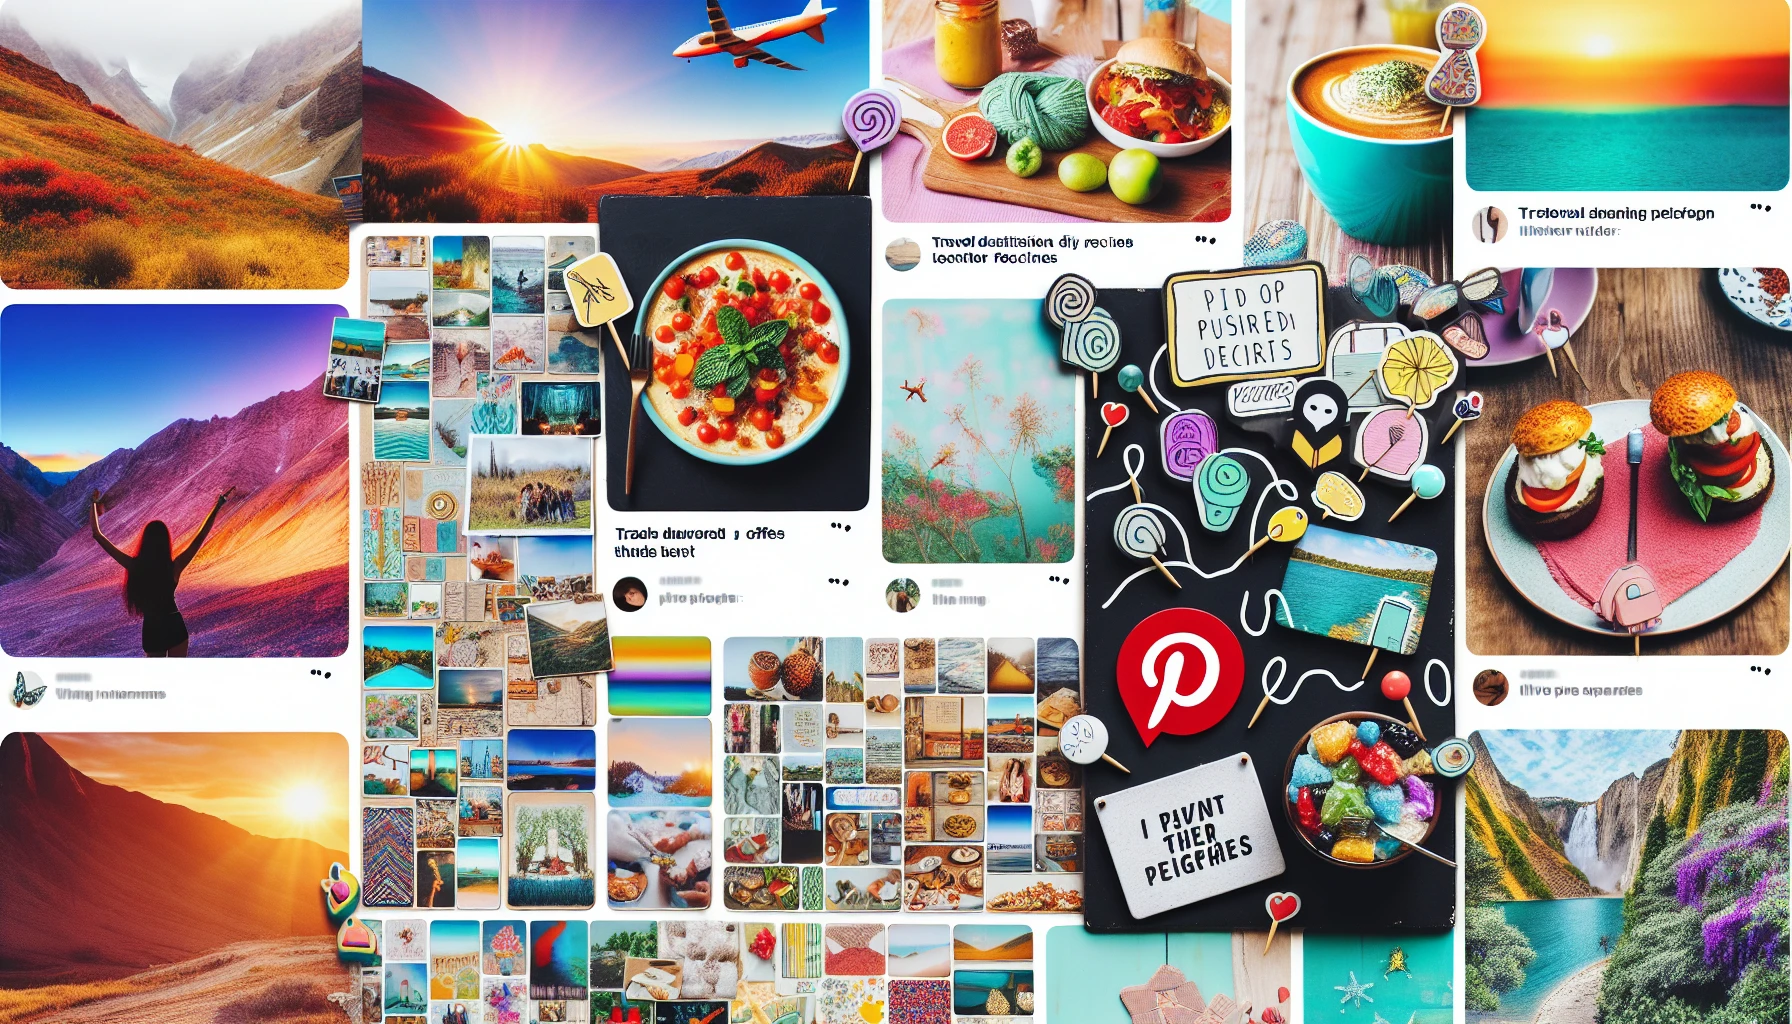 Creating visually appealing Pinterest boards